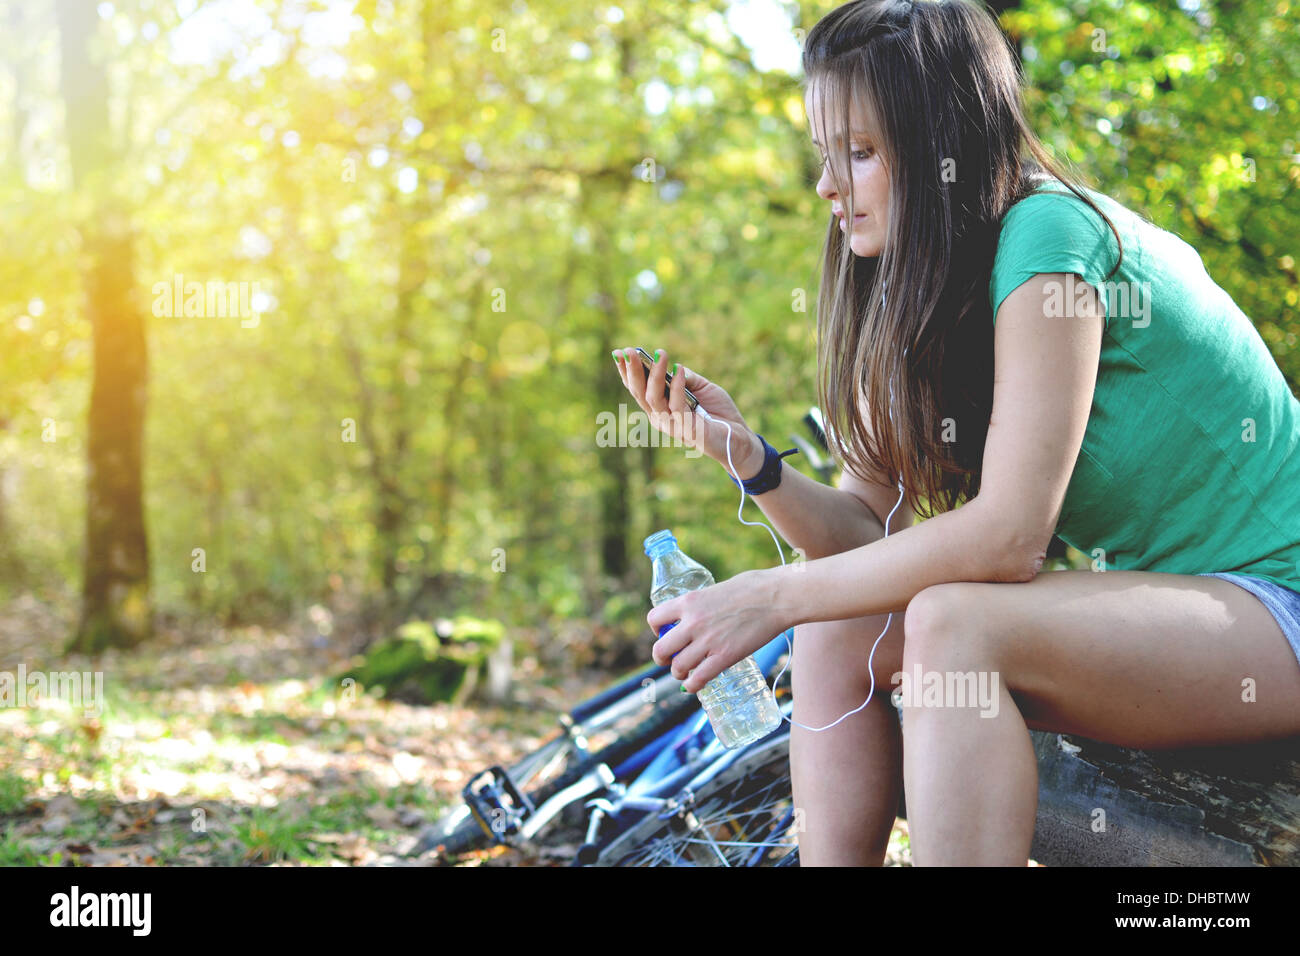 young woman with bicycle Stock Photo